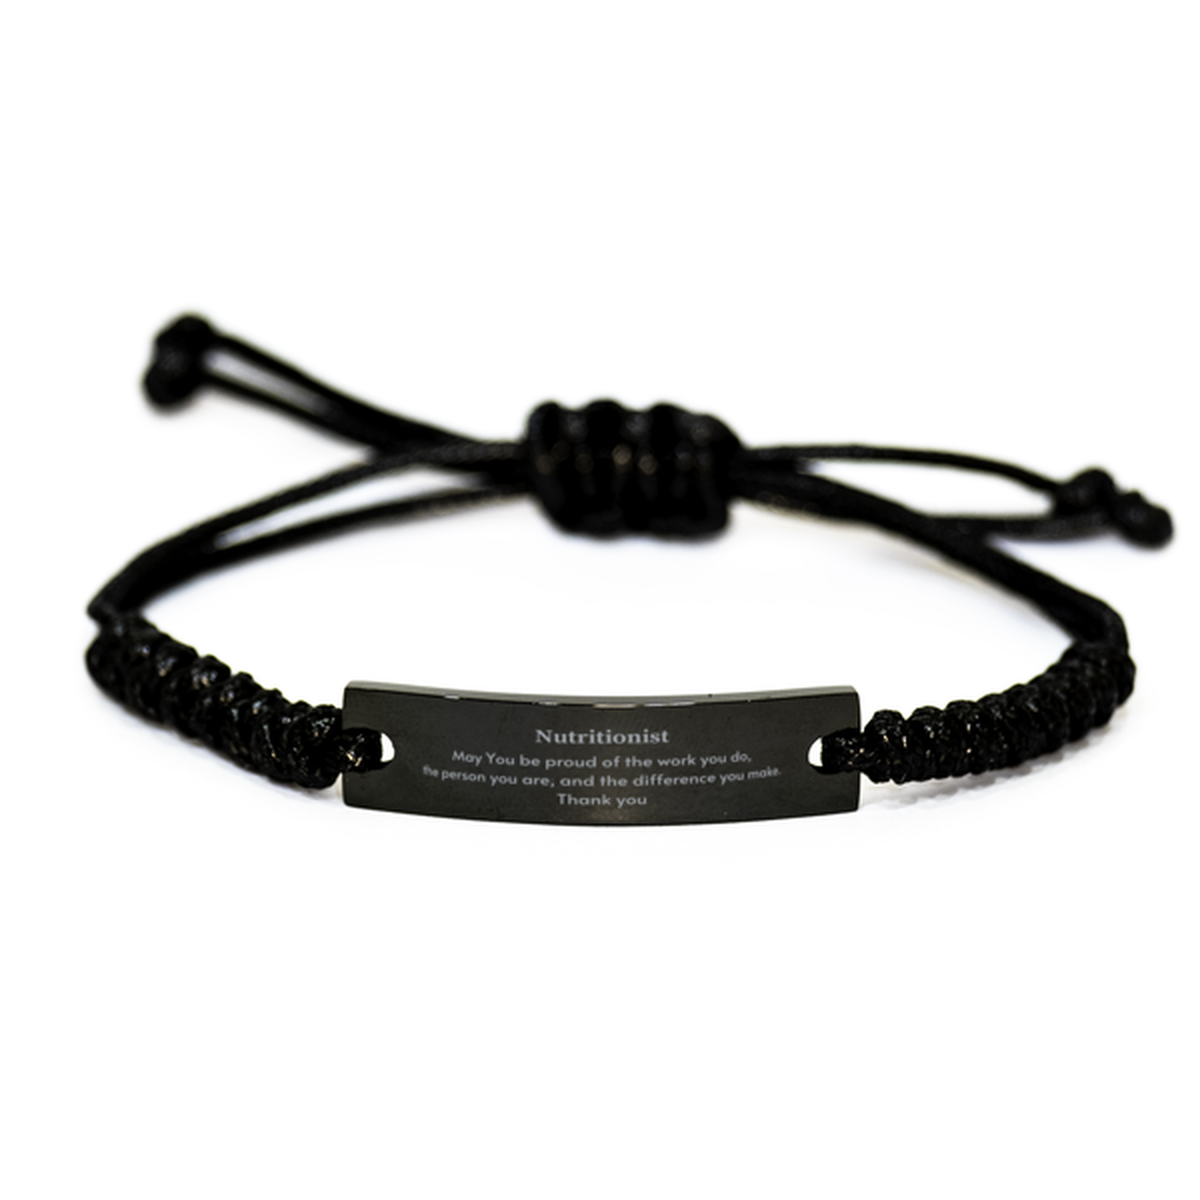 Heartwarming Black Rope Bracelet Retirement Coworkers Gifts for Nutritionist, Nutritionist May You be proud of the work you do, the person you are Gifts for Boss Men Women Friends